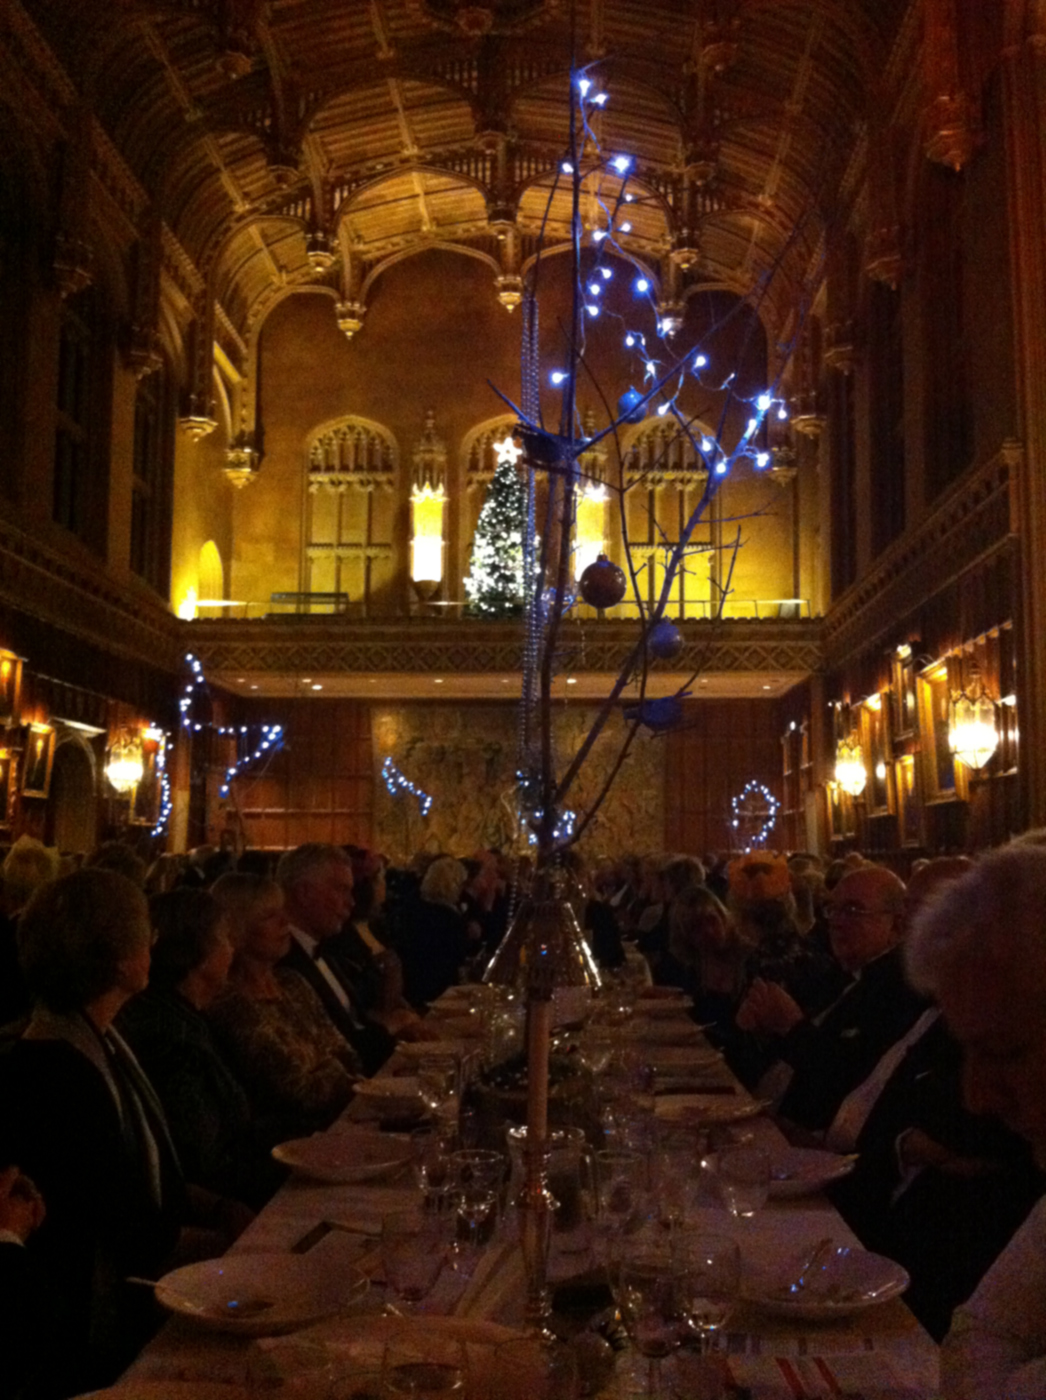 King's College, charity gala event